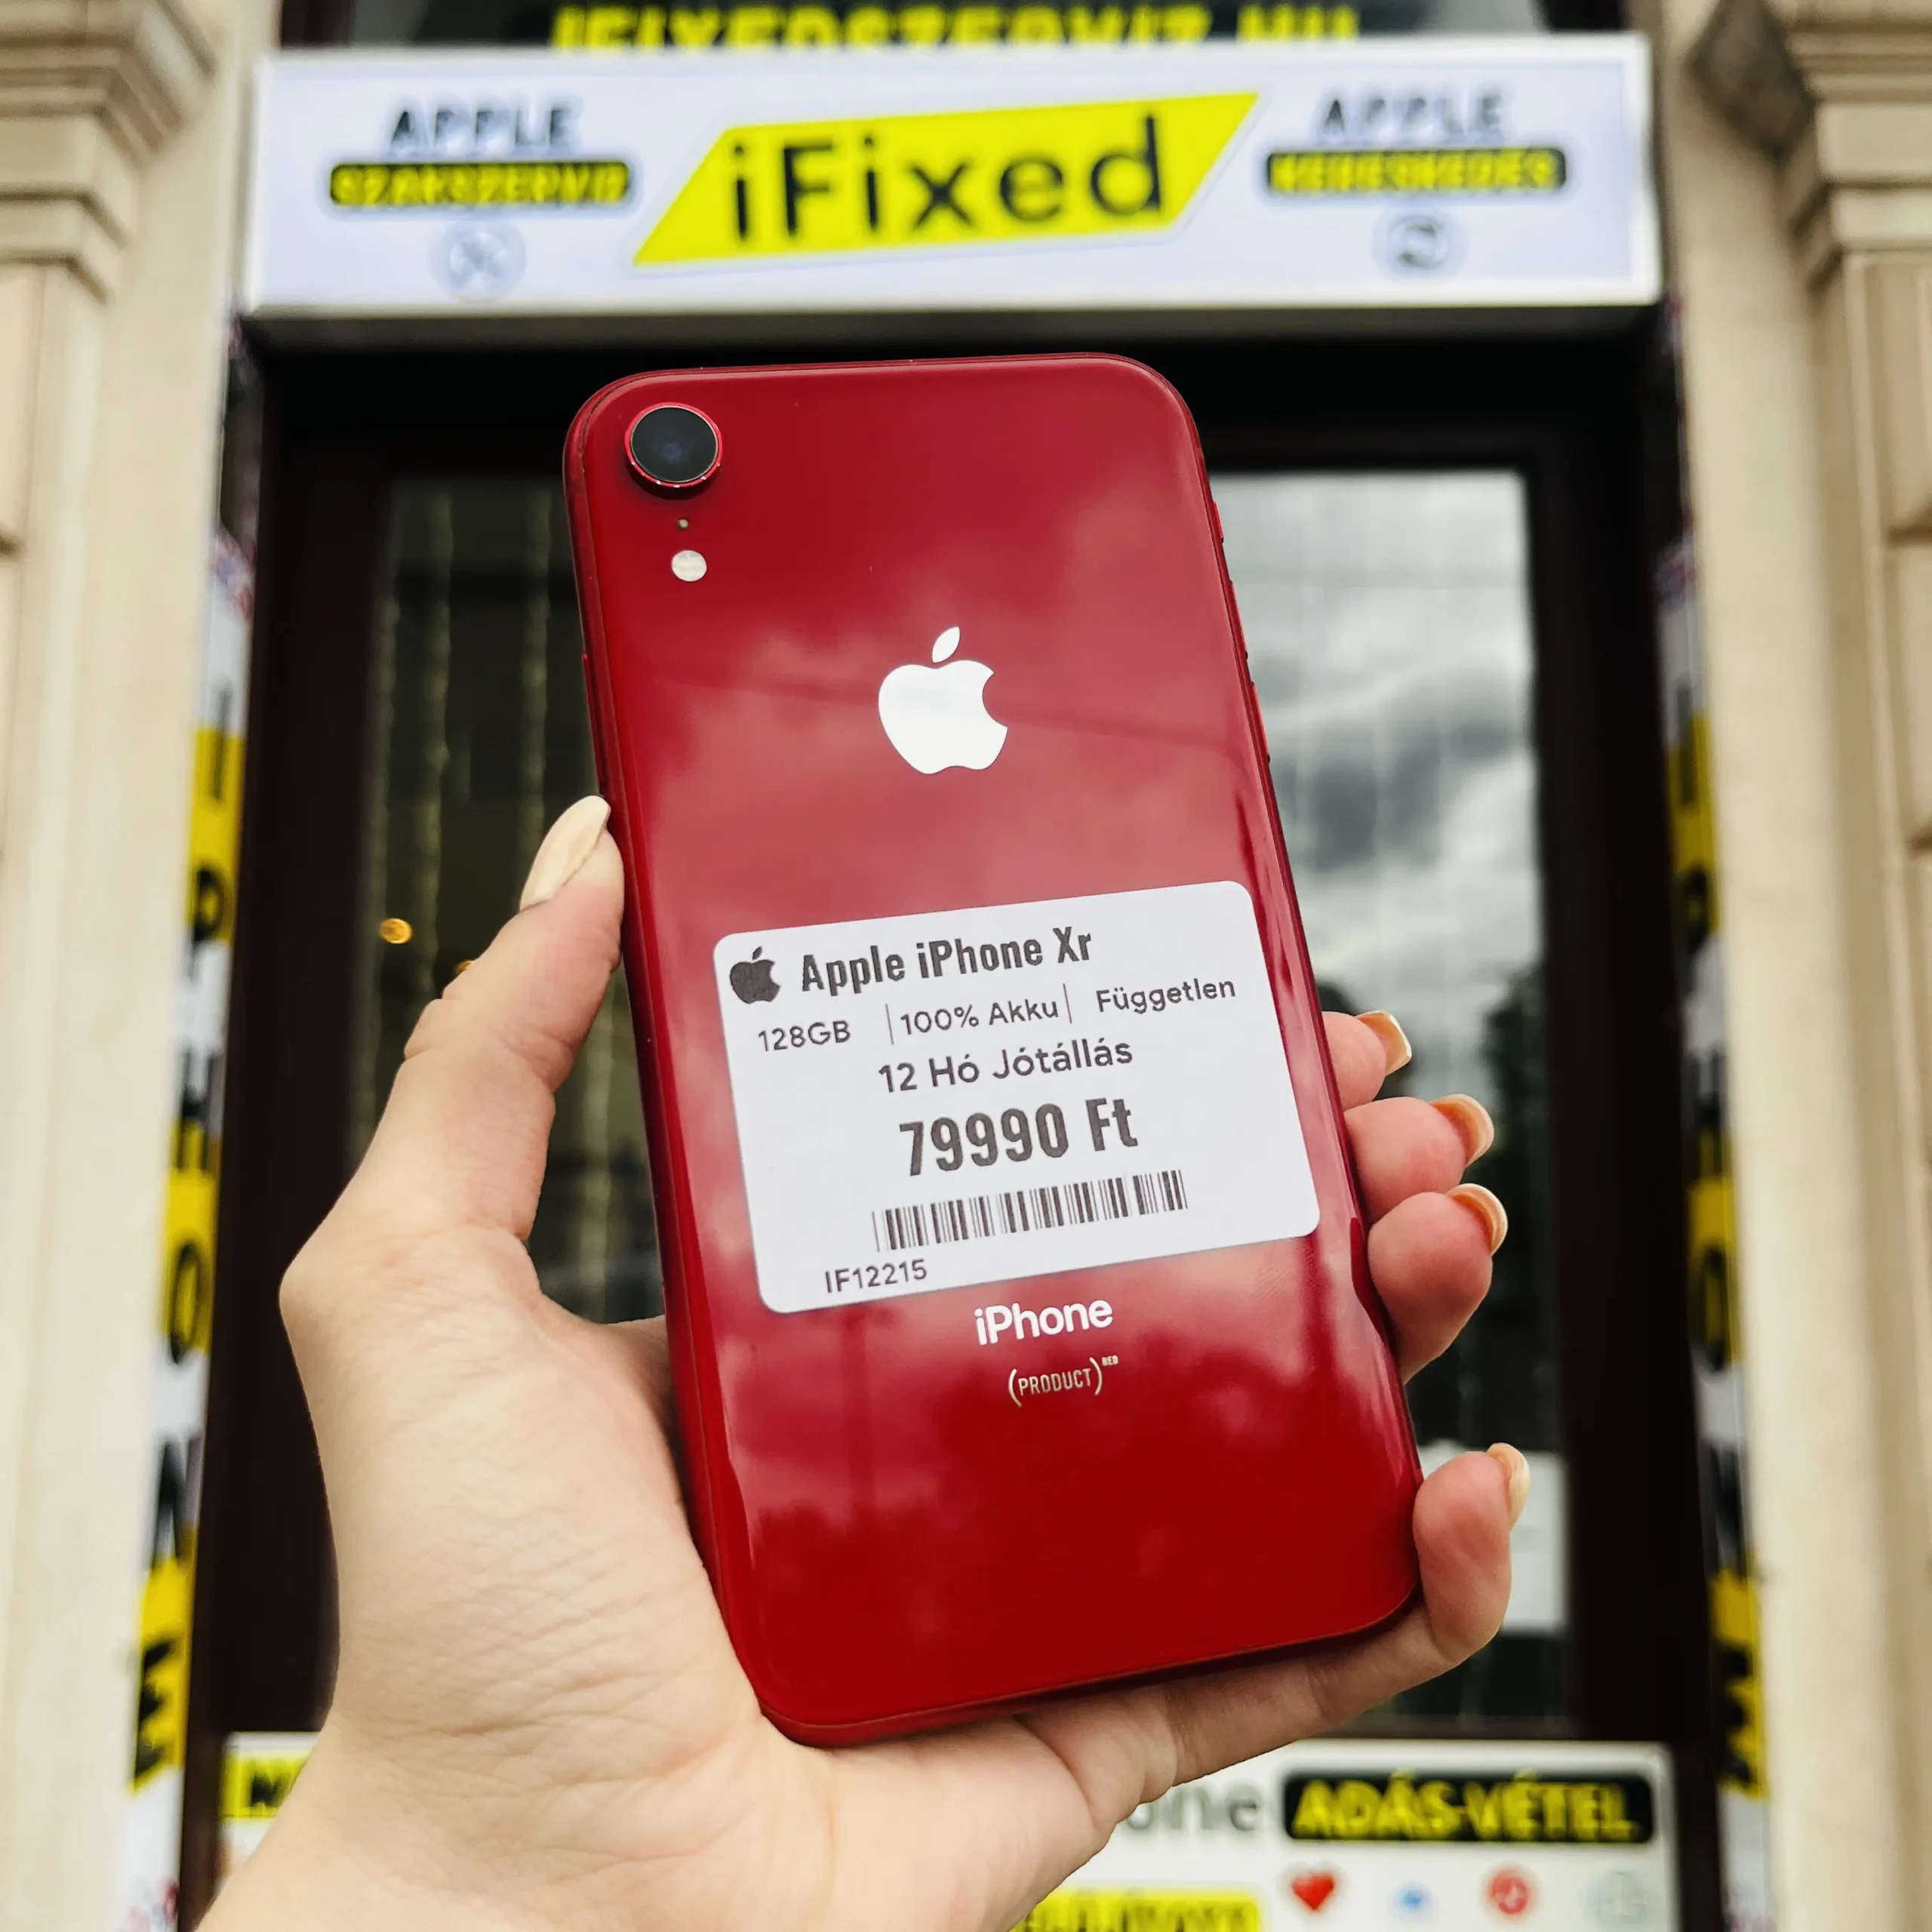 iphone xr (if12215)